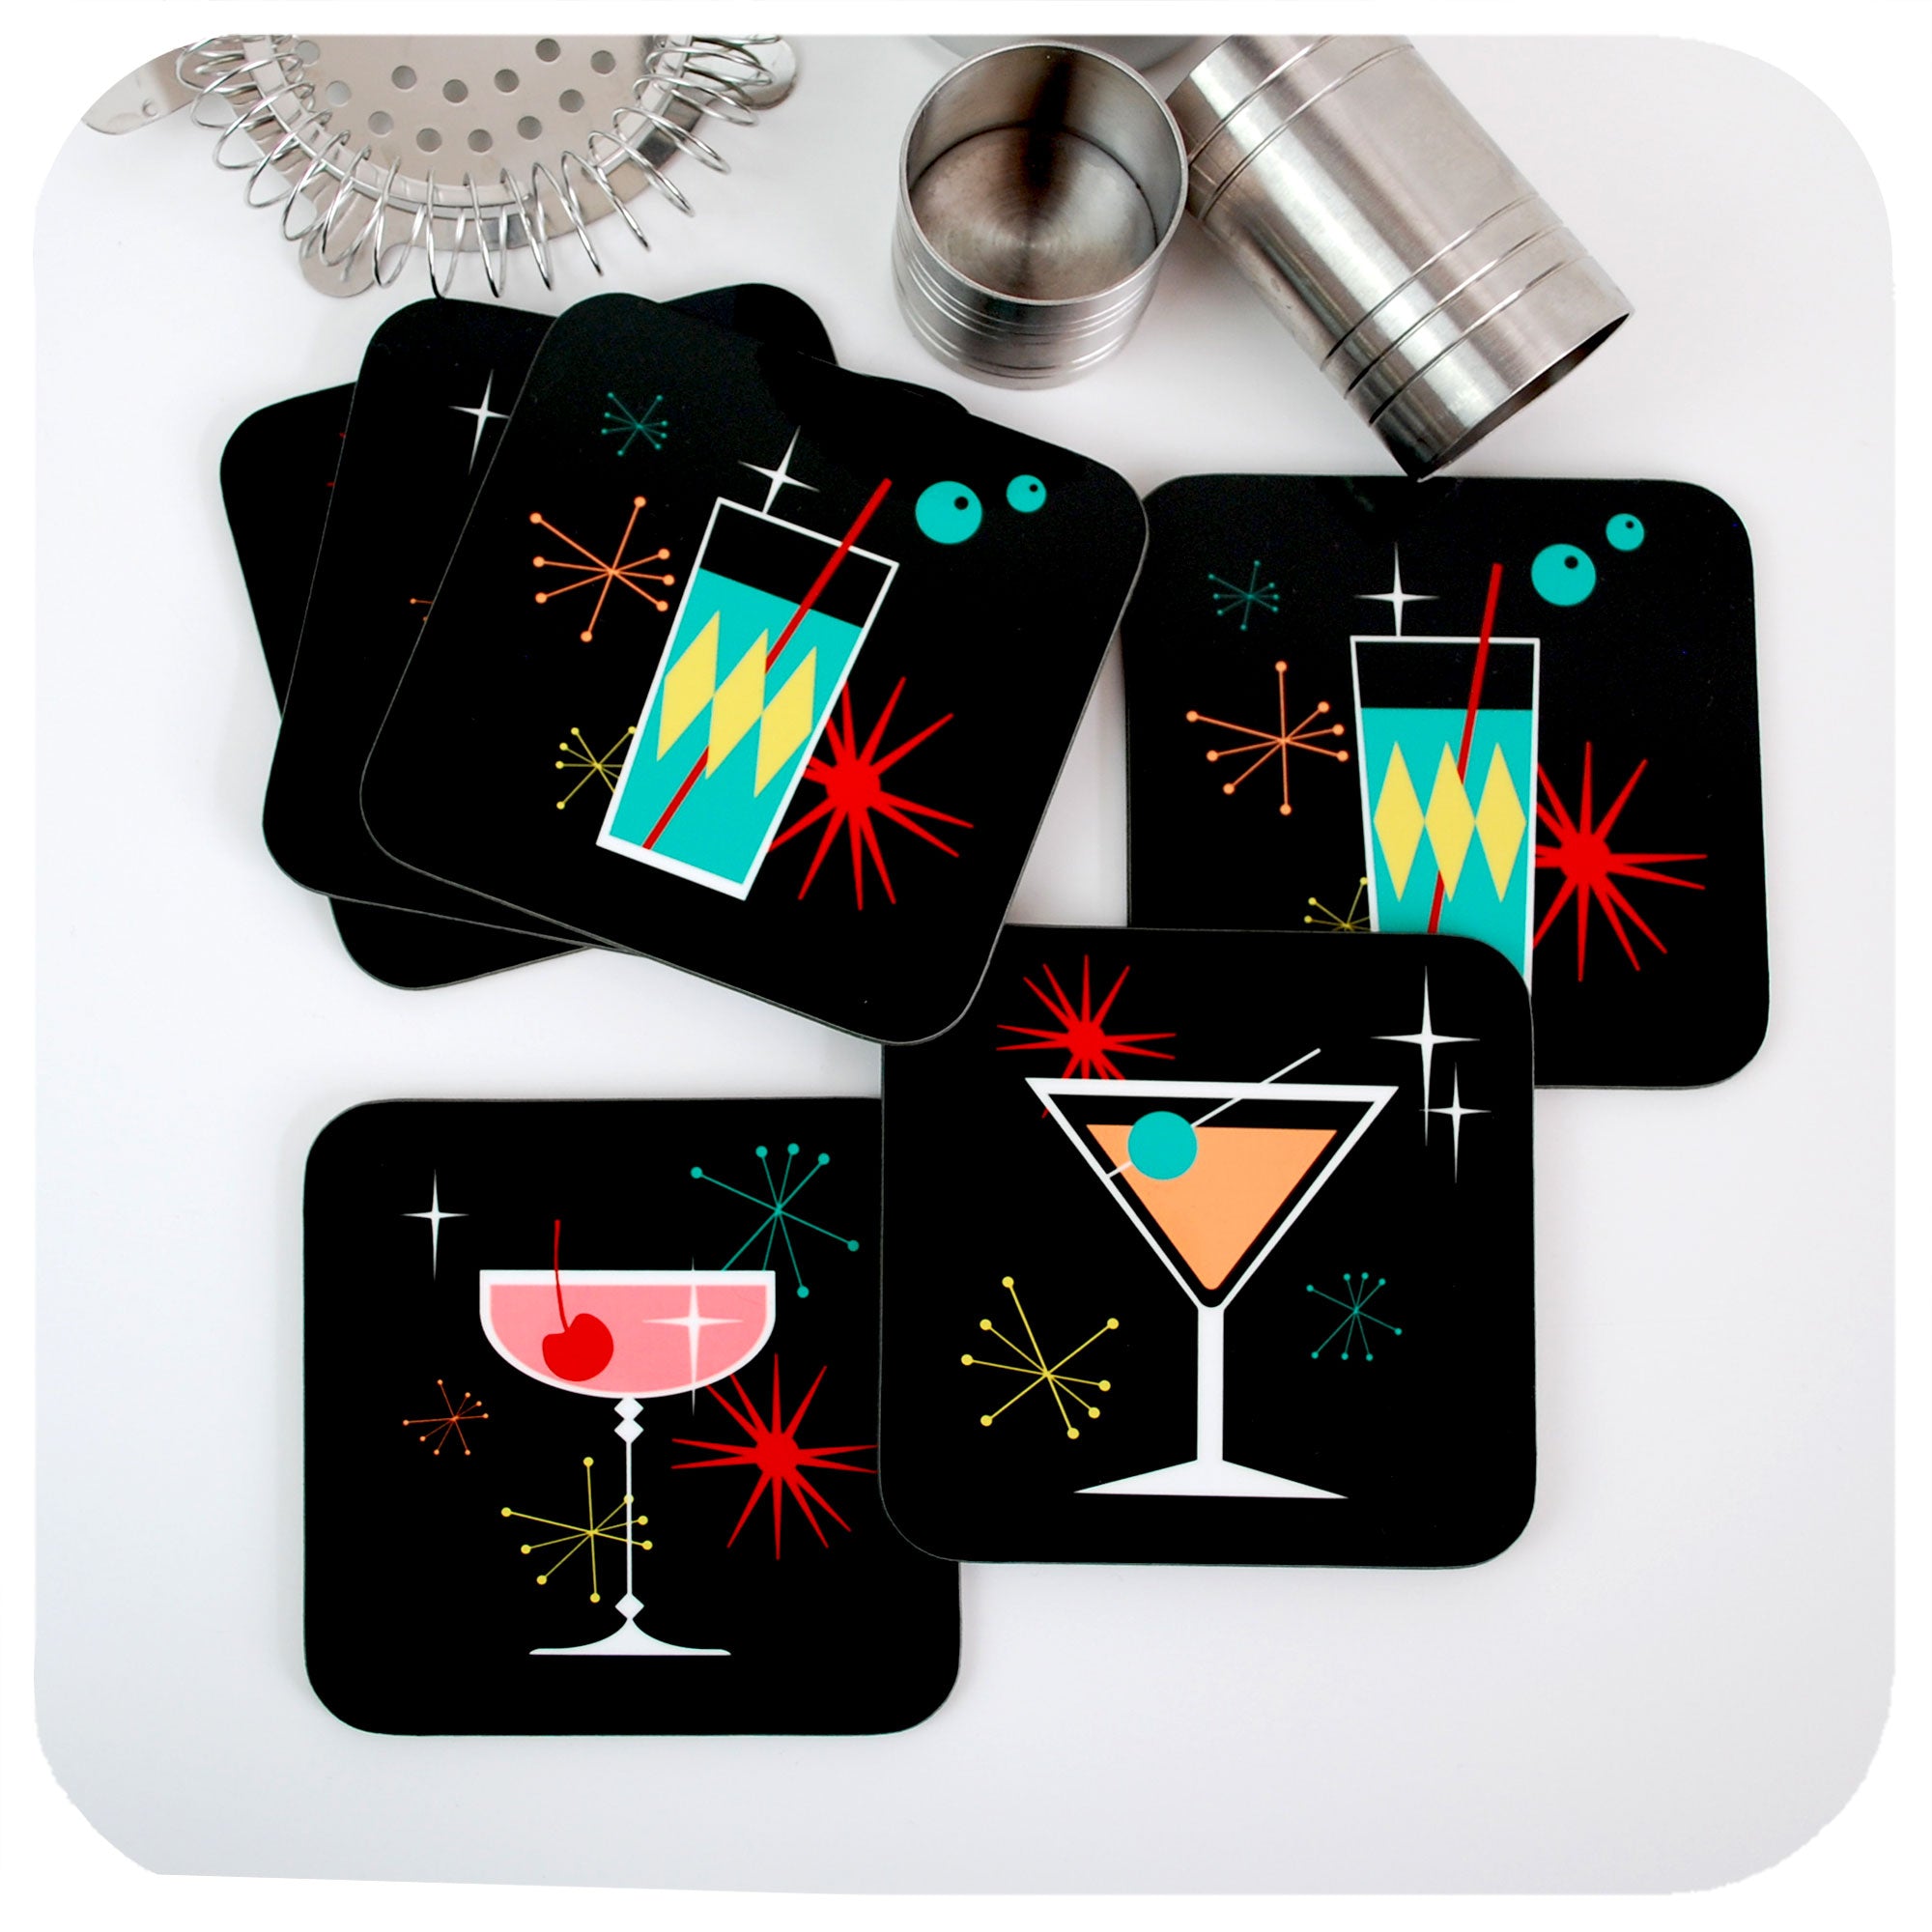 Cosmic Cocktail Coasters, set of 6, on table with cocktail bar accessories | The Inkabilly Emporium